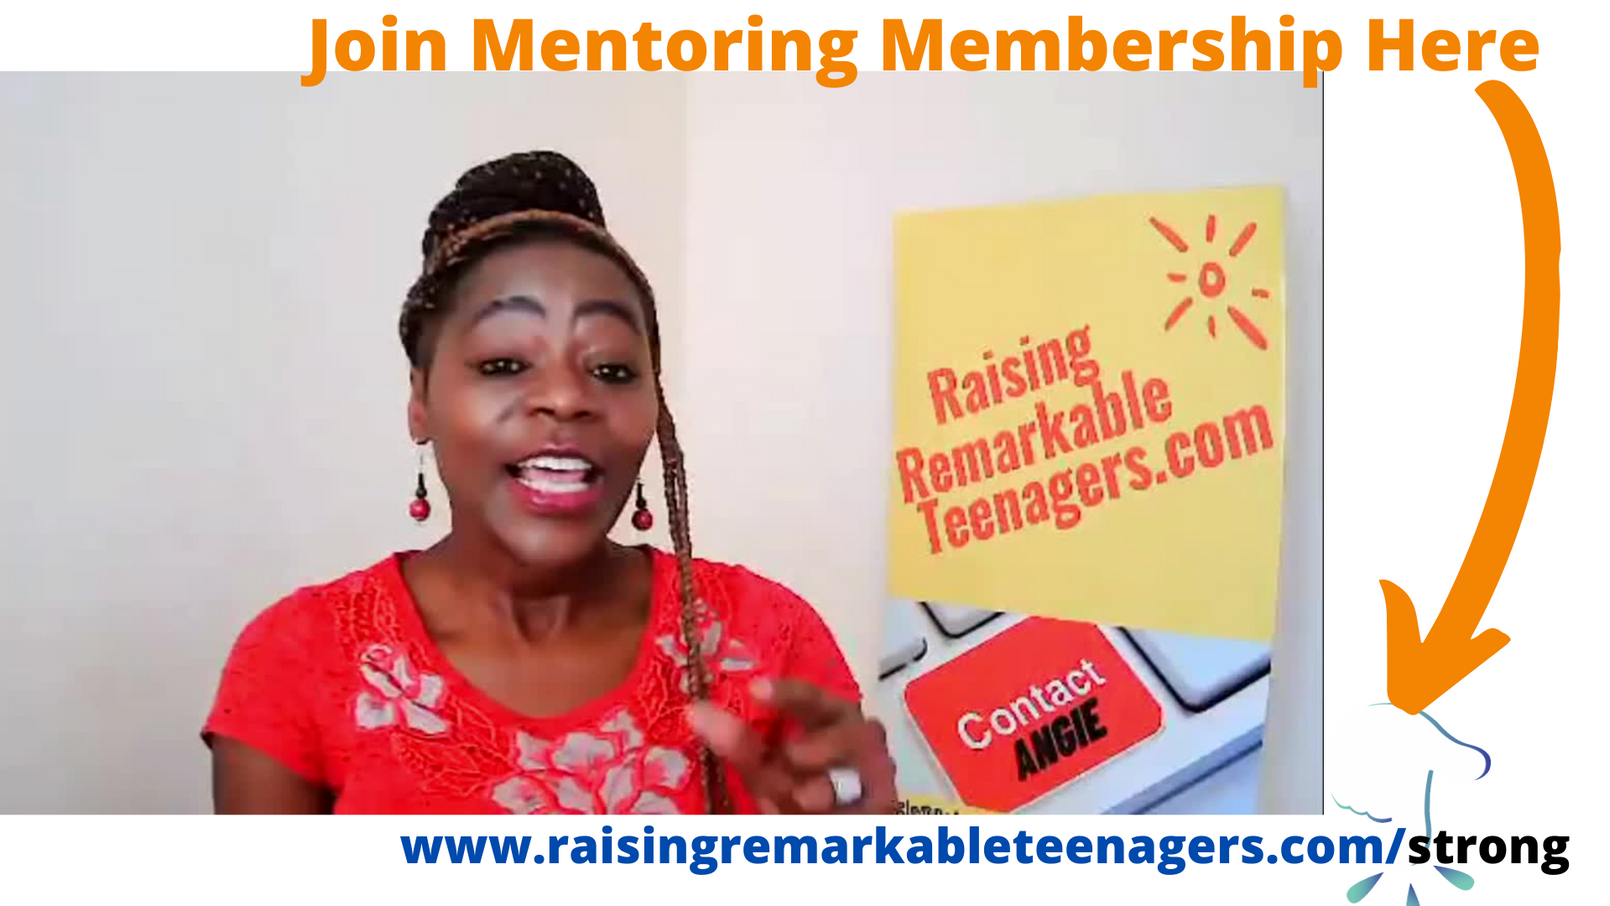 Special Invitation to Join Mentoring Membership